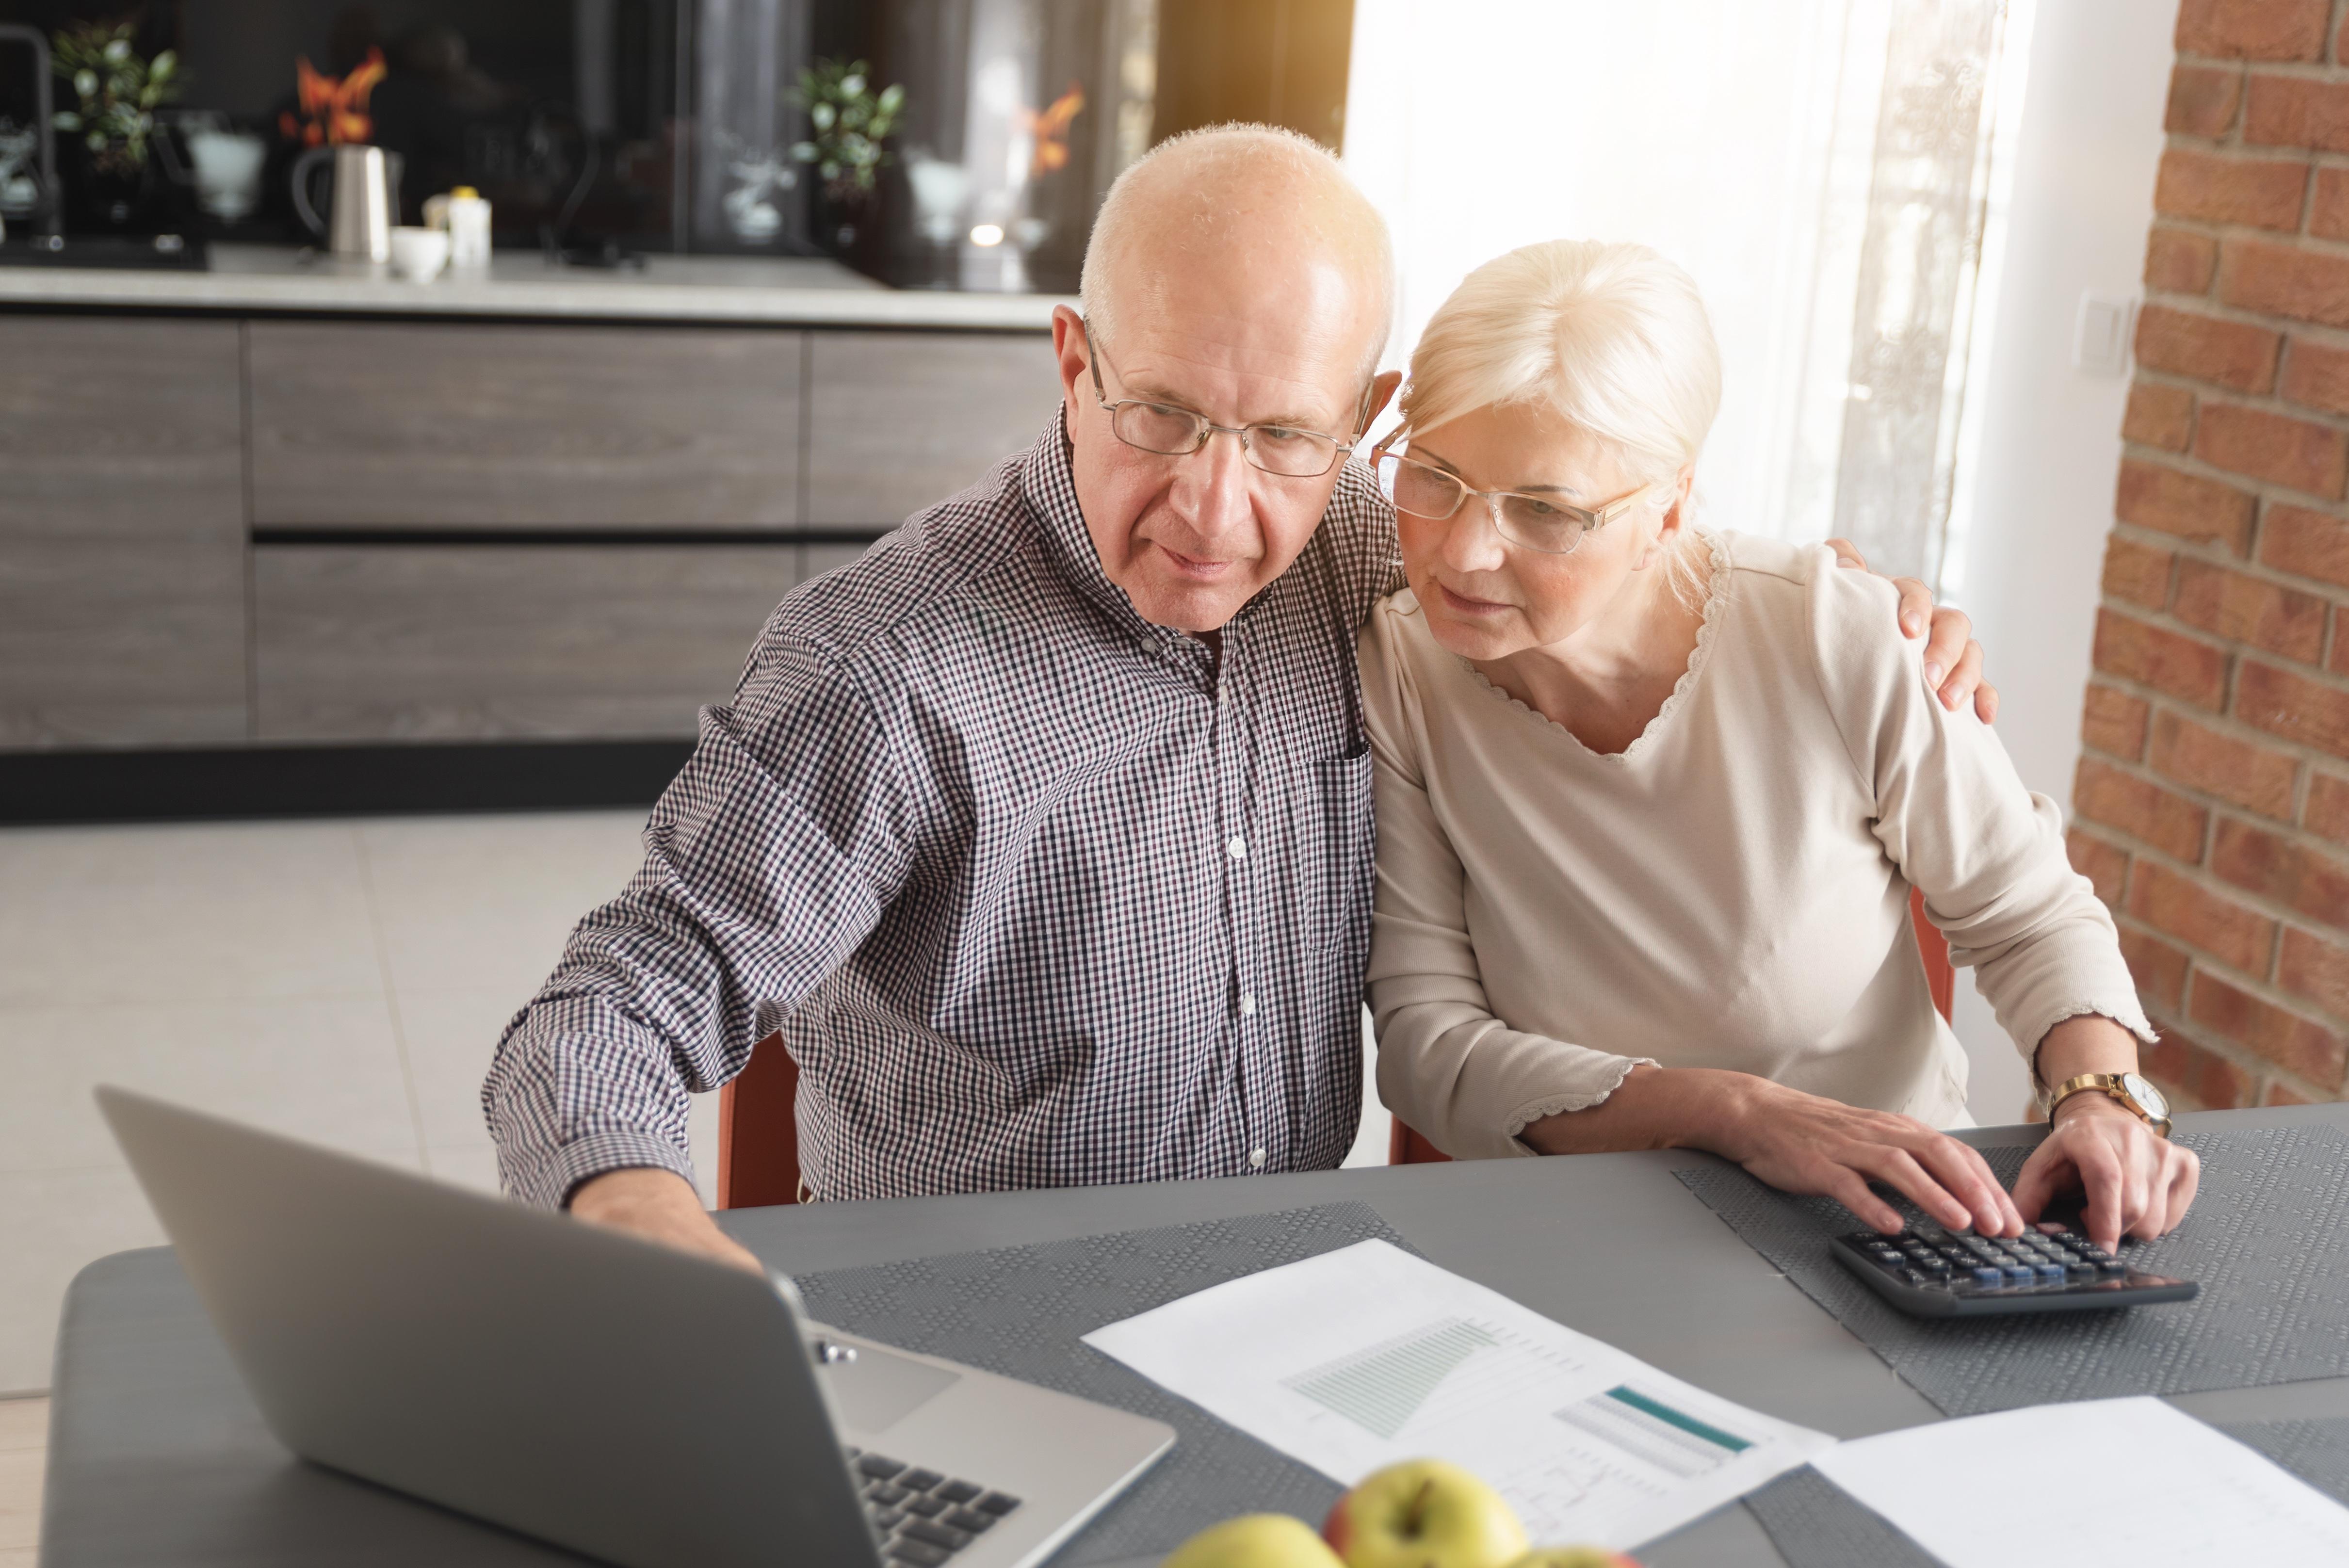 4 Questions to Ask When Selecting a Medicare Advantage Plan